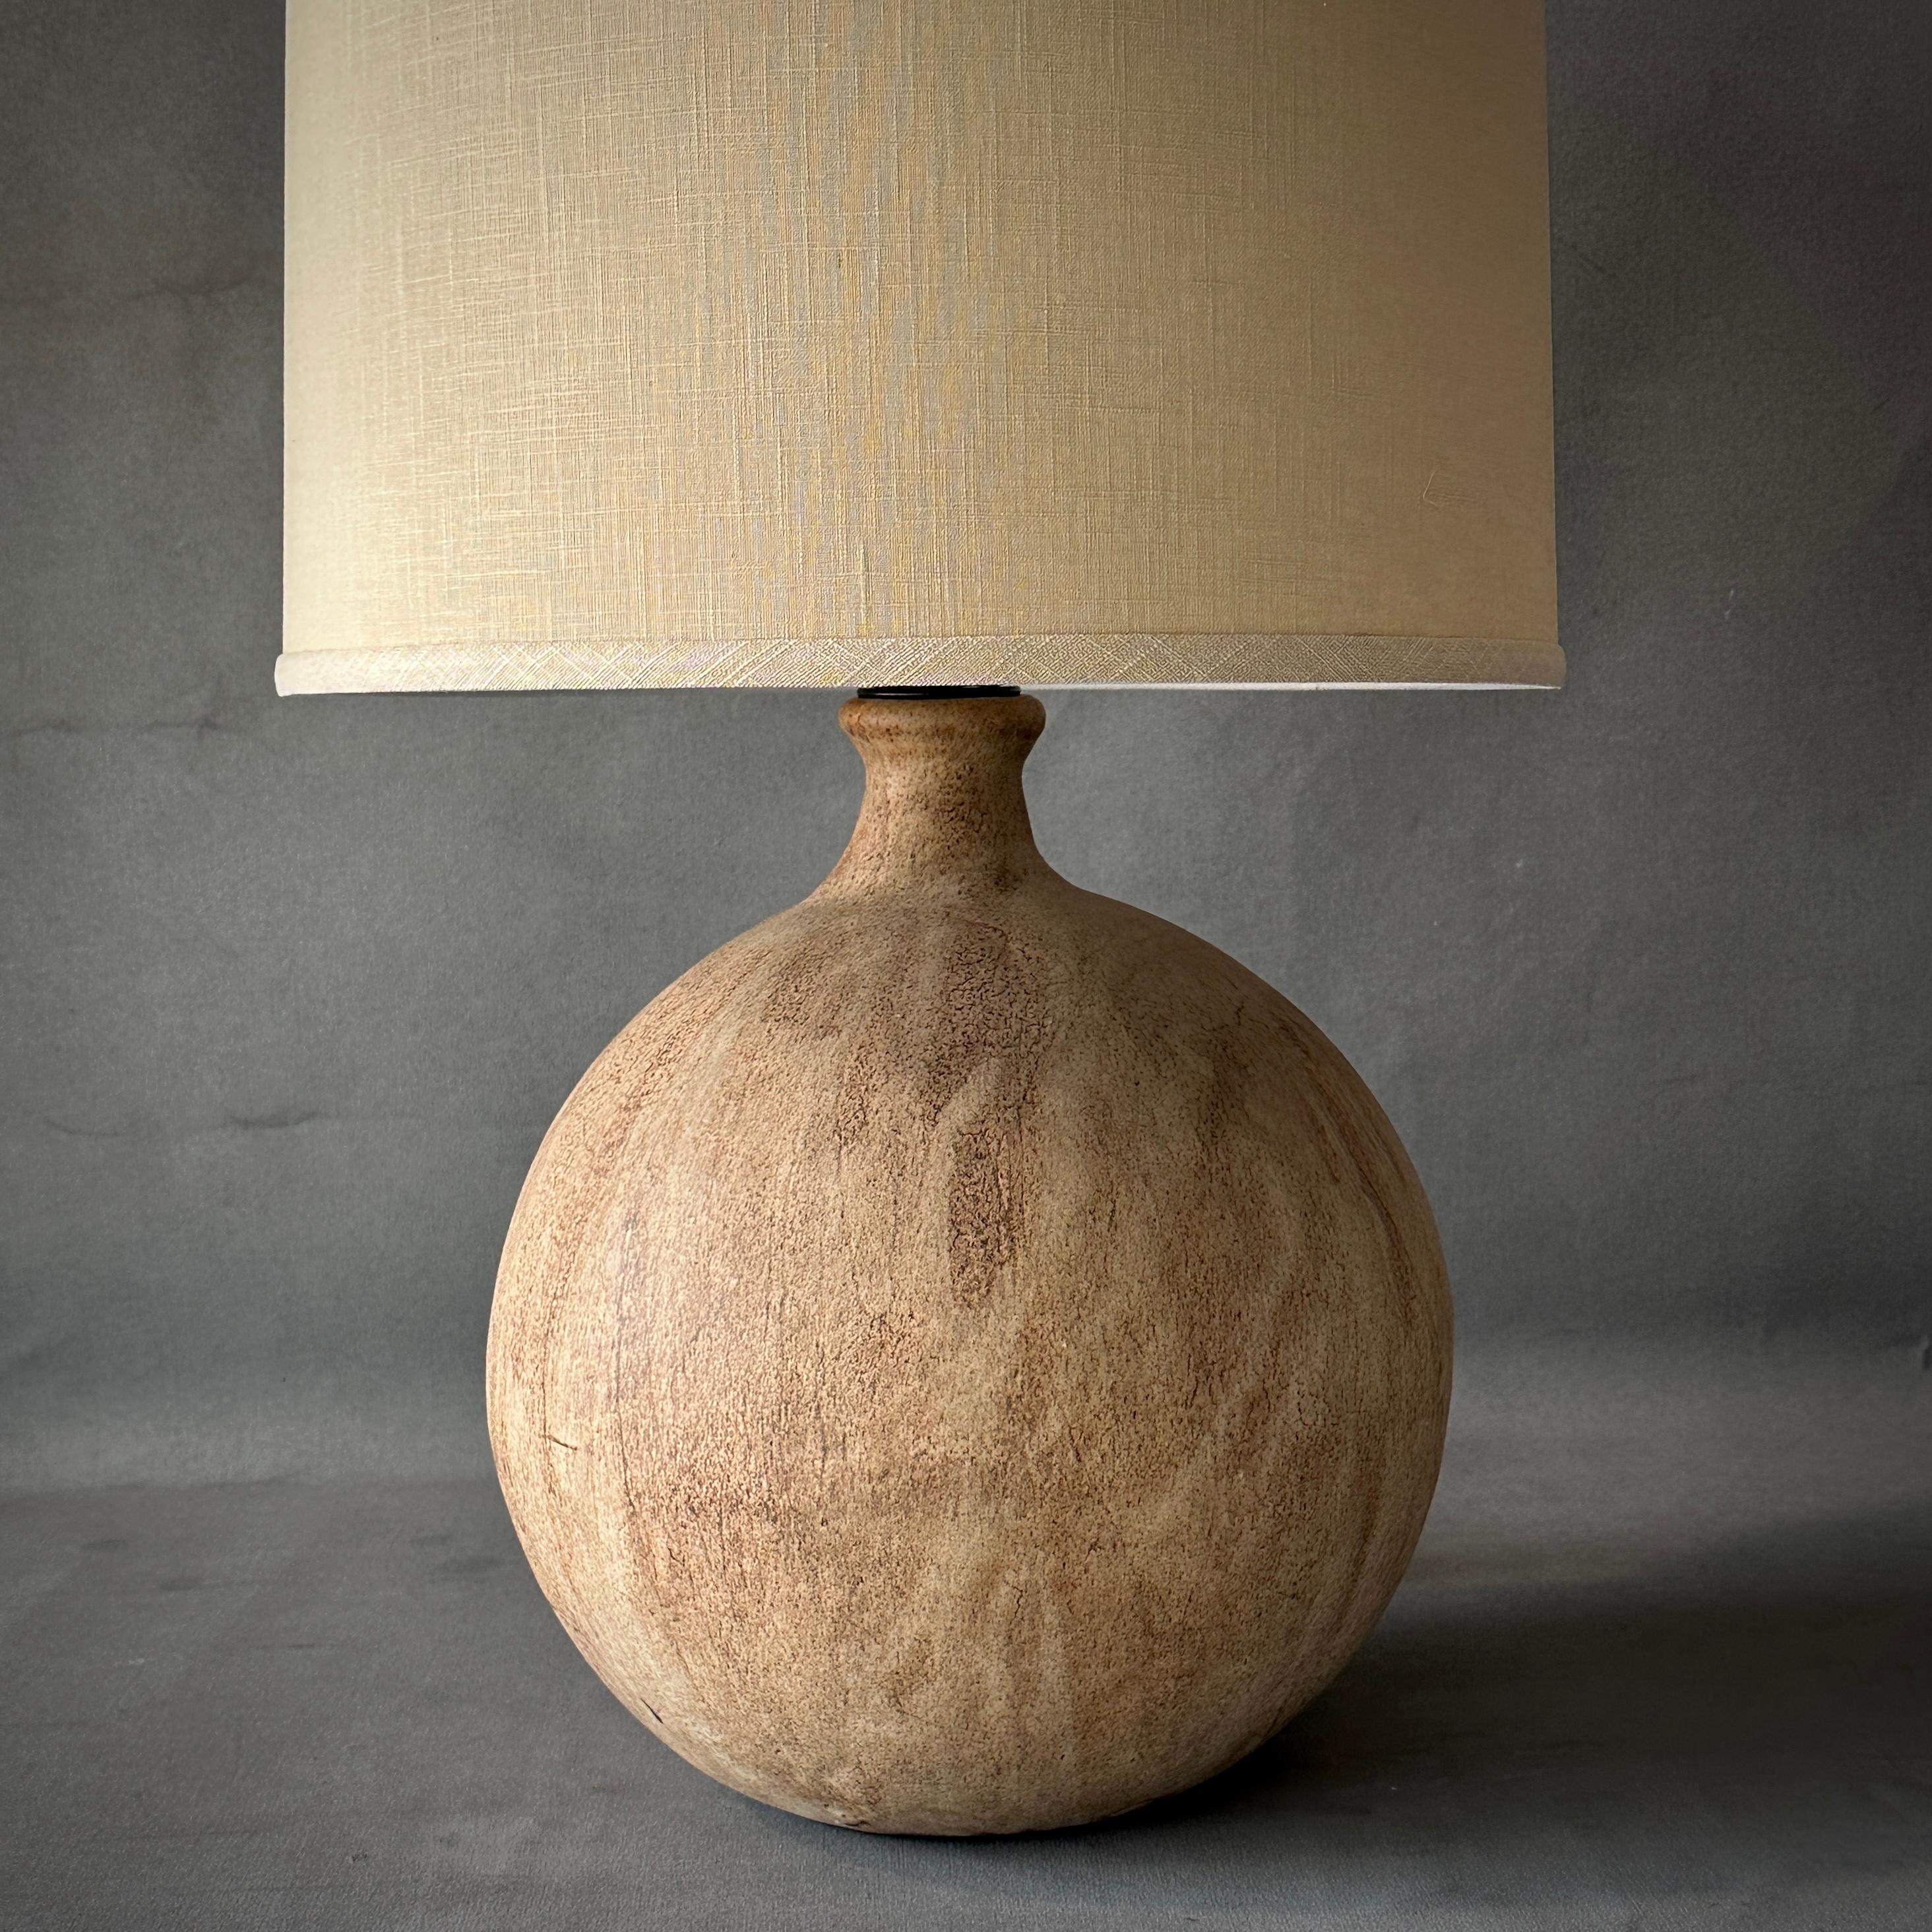 Belgian mid-century large spherical ceramic lamp with soft abstract patterning and pale terracotta finish. Includes ivory linen shade. A versatile table lamp with a cool neutral color palette.

Belgium, circa 1960

Dimensions: 16W x 16D x 26H